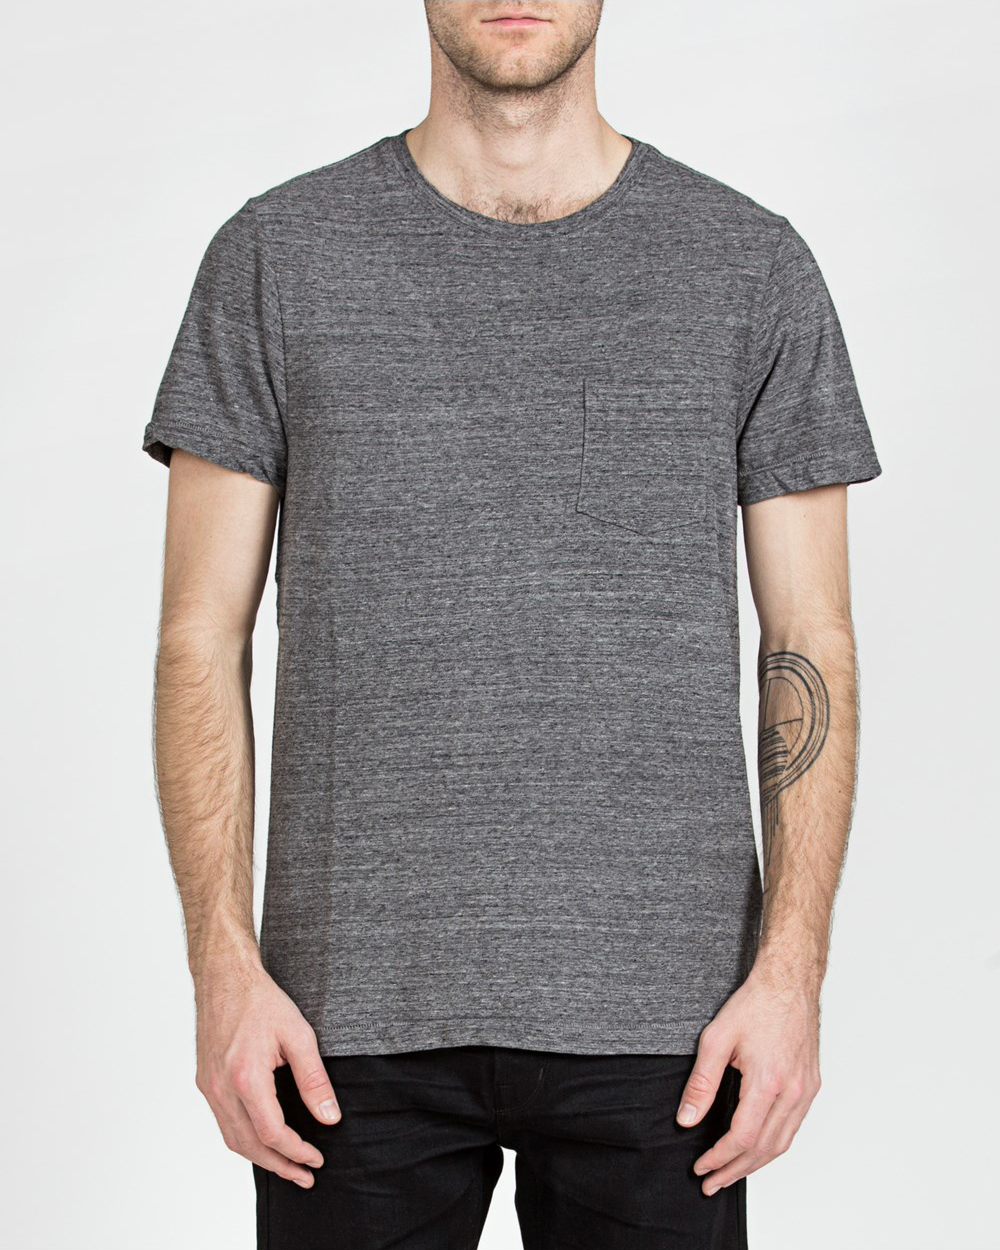 Current/Elliott classic fit pocket tee, $179, from Workshop.